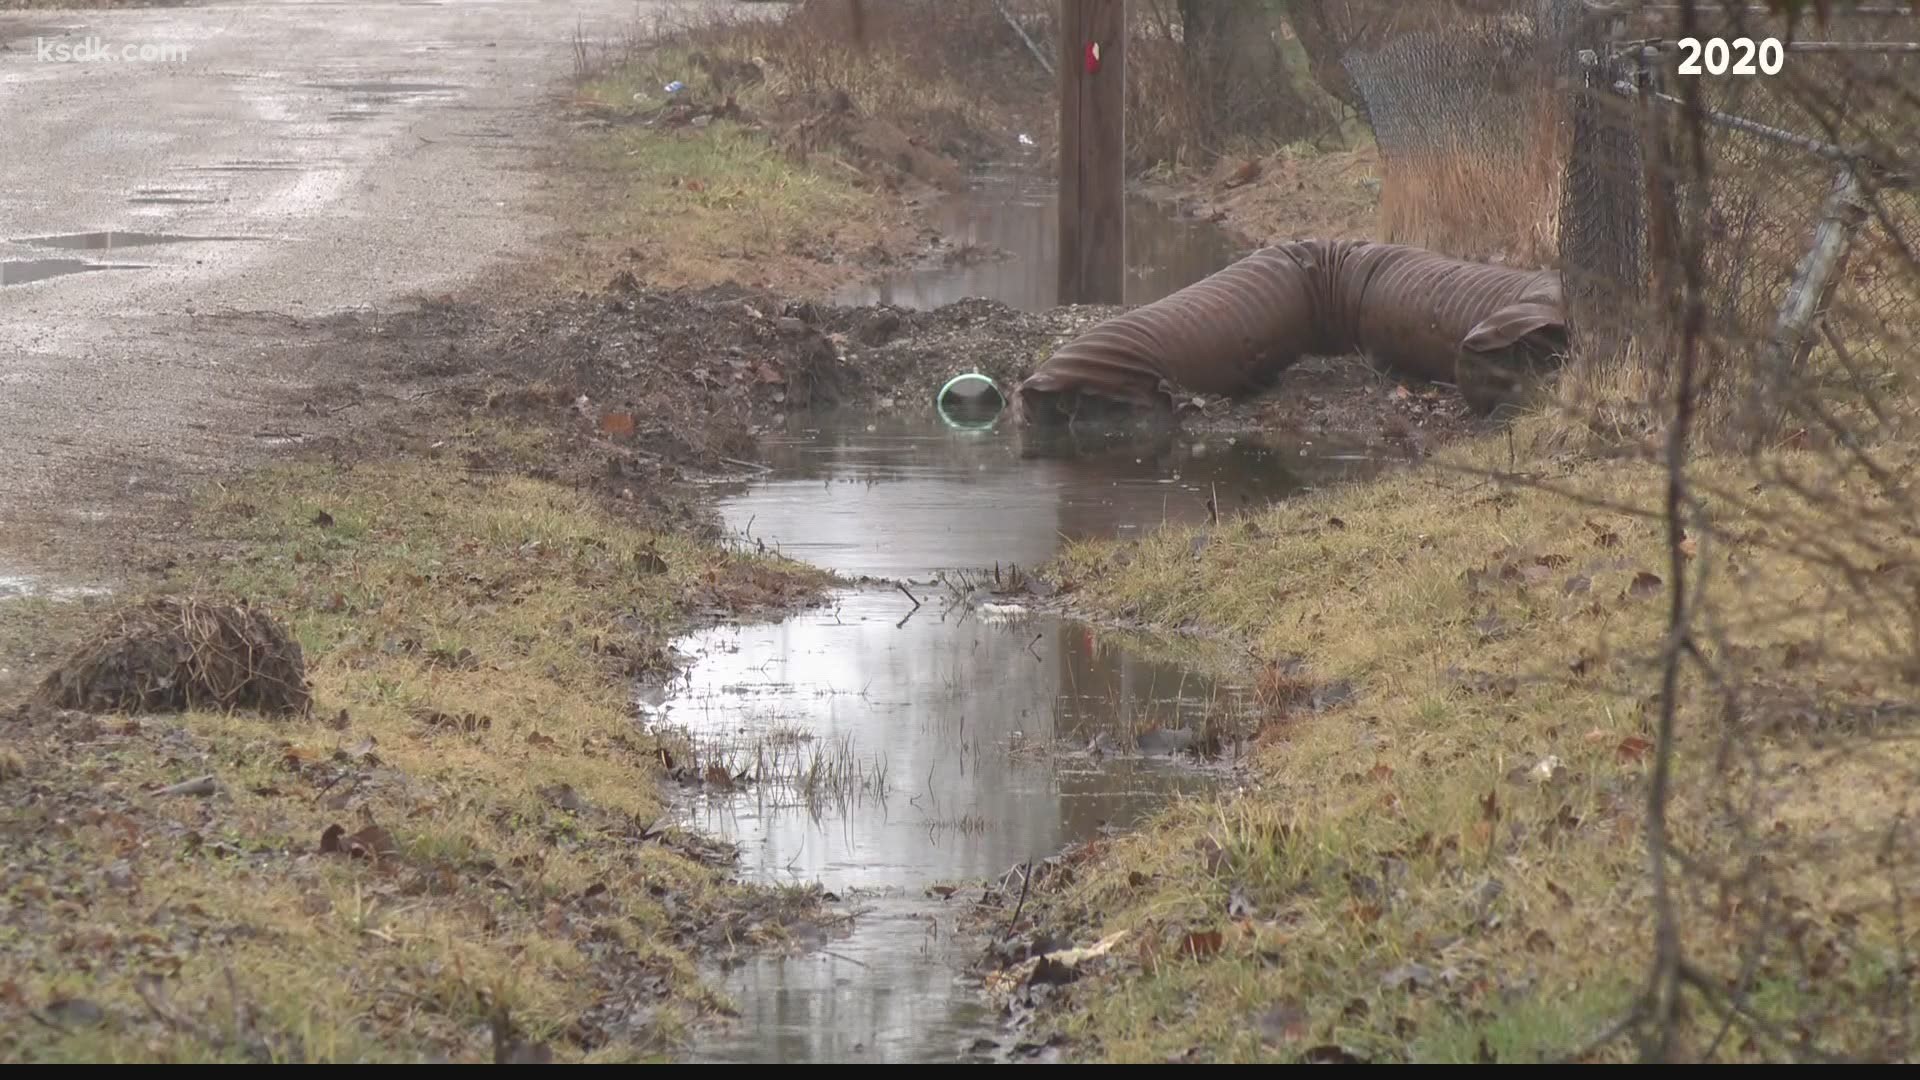 Centreville, Cahokia and Alorton have requested a $22 million grant for a sewer system rebuild